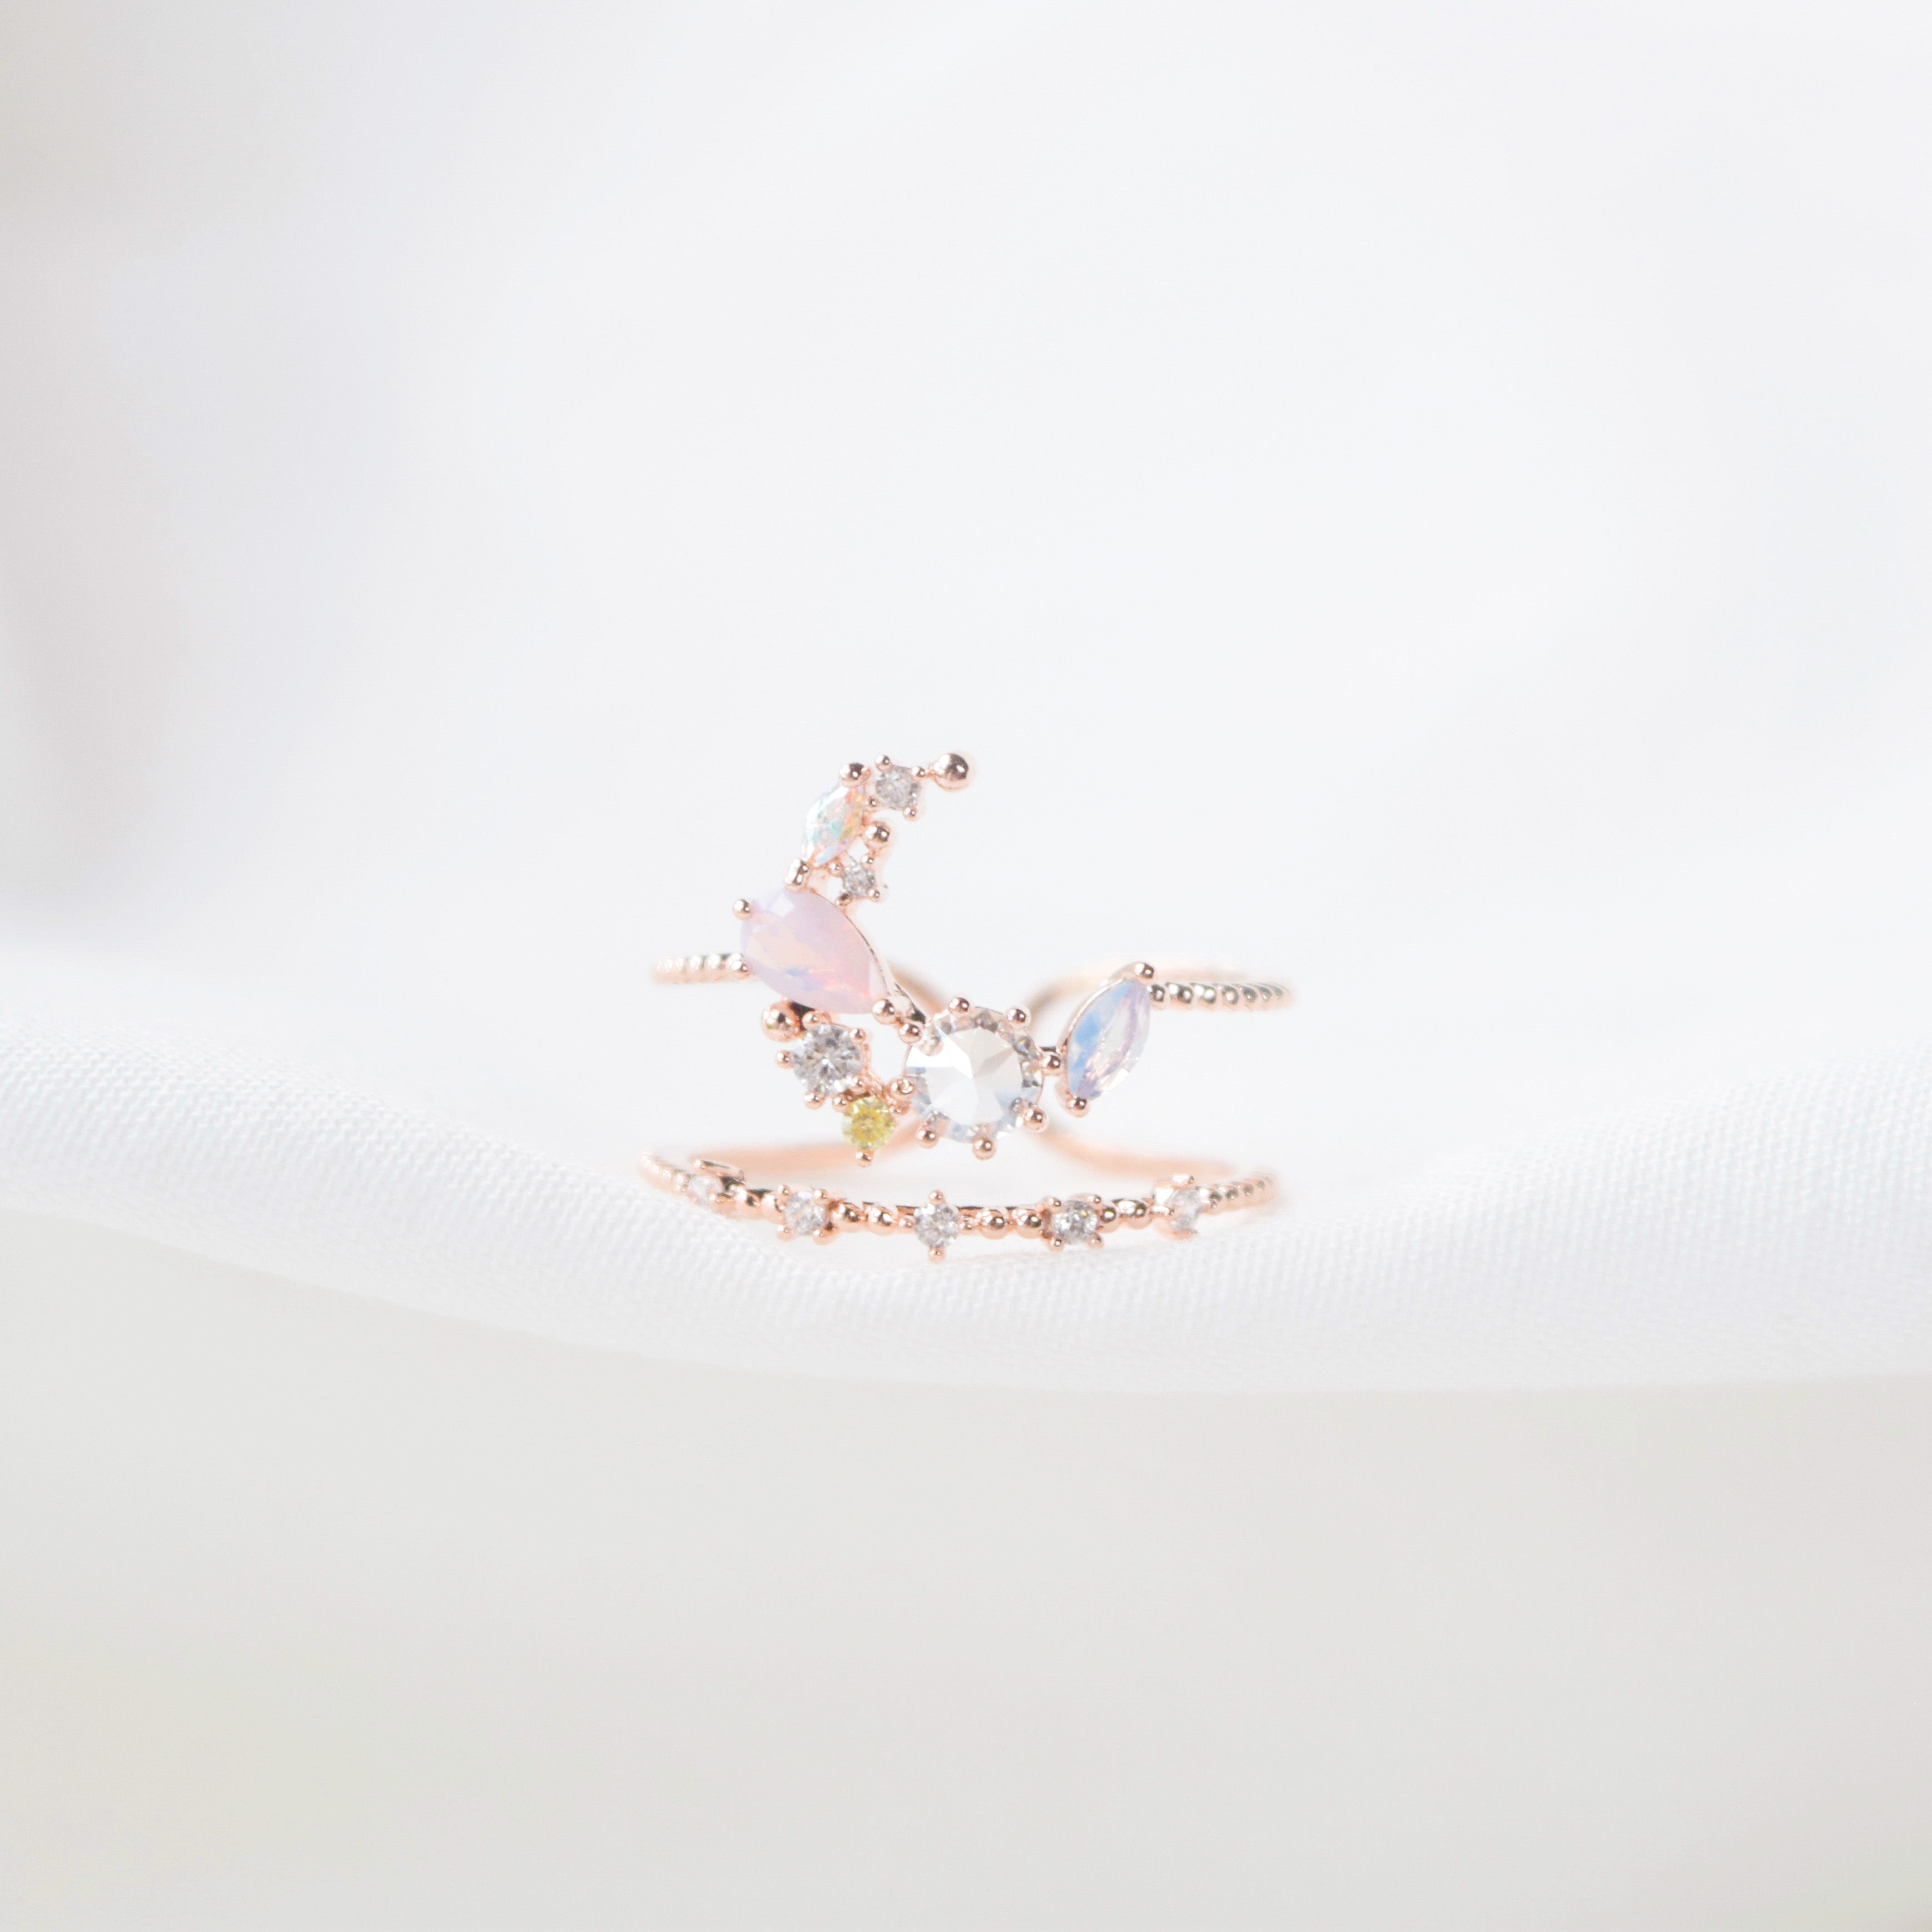 Rose Gold Made in Korea Earrings Korean Anting Cubic Zirconia Jewellery Malaysia Instagram 925 Sterling Silver hypoallergenic Instagram gift shops Jewellery Online Malaysia Shopping No Piercing Perfect Gift special gift Loved One Online jewellery Malaysia Gift for her Rose Gold Korea Made Earrings Korean Jewellery Jewelry Local Brand in Malaysia Cubic Zirconia Dainty Delicate Minimalist Jewellery Jewelry Bride ring cincin Silver Gift Set present gift for her gift ideas